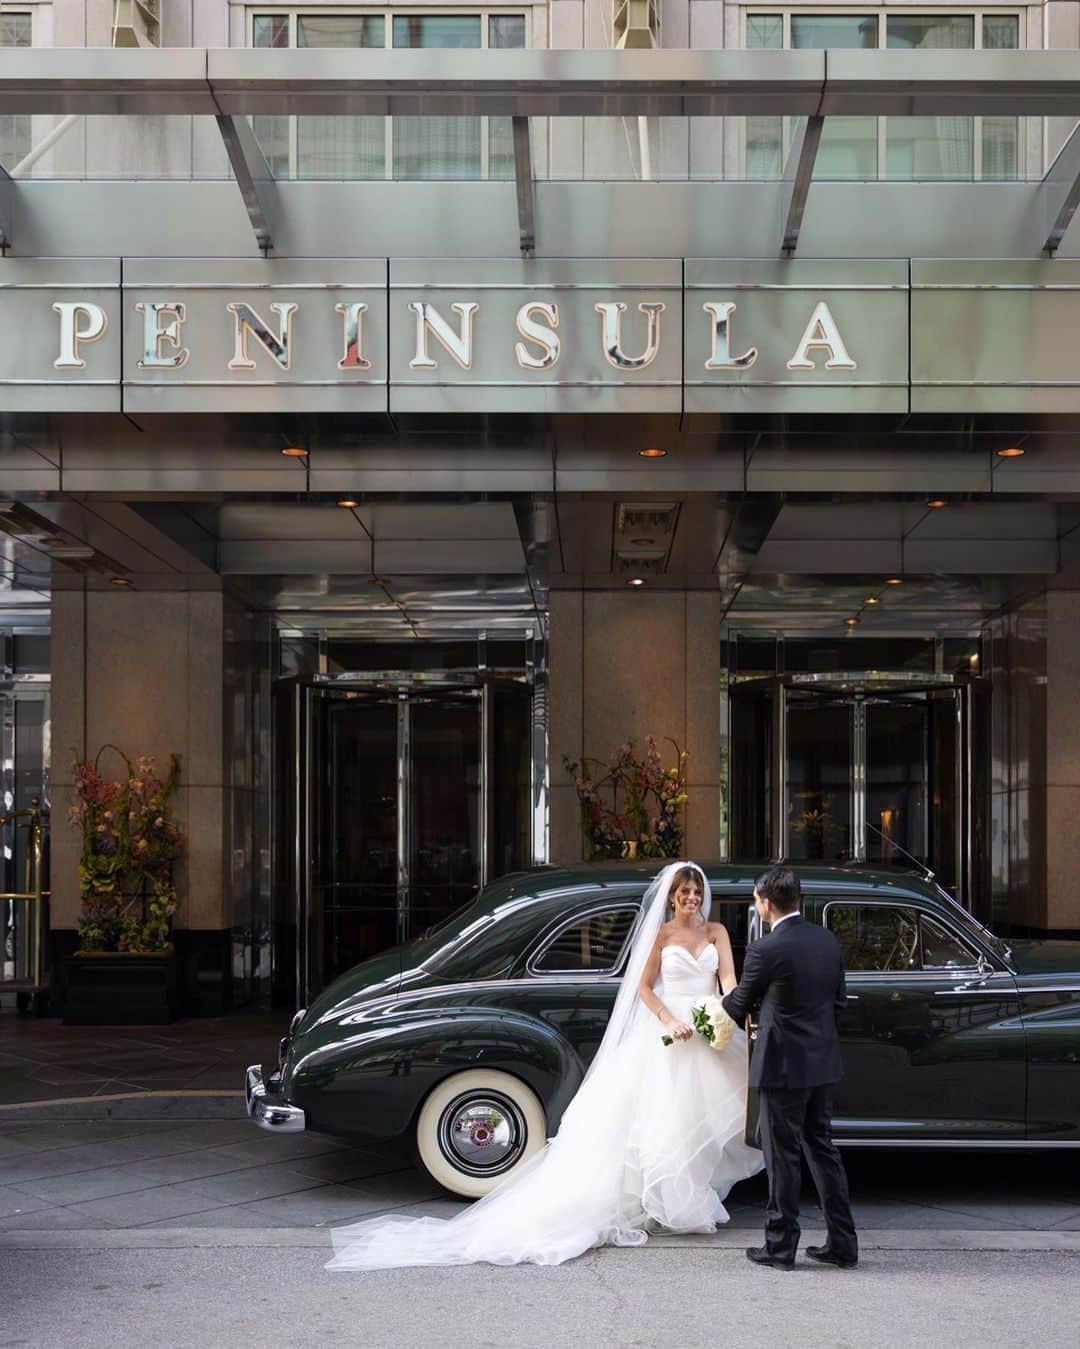 The Peninsula Hotelsのインスタグラム：「Wedded bliss begins right here at @thepeninsulachi. #penweddings #penmoments 📸 via @cristinagphoto.」